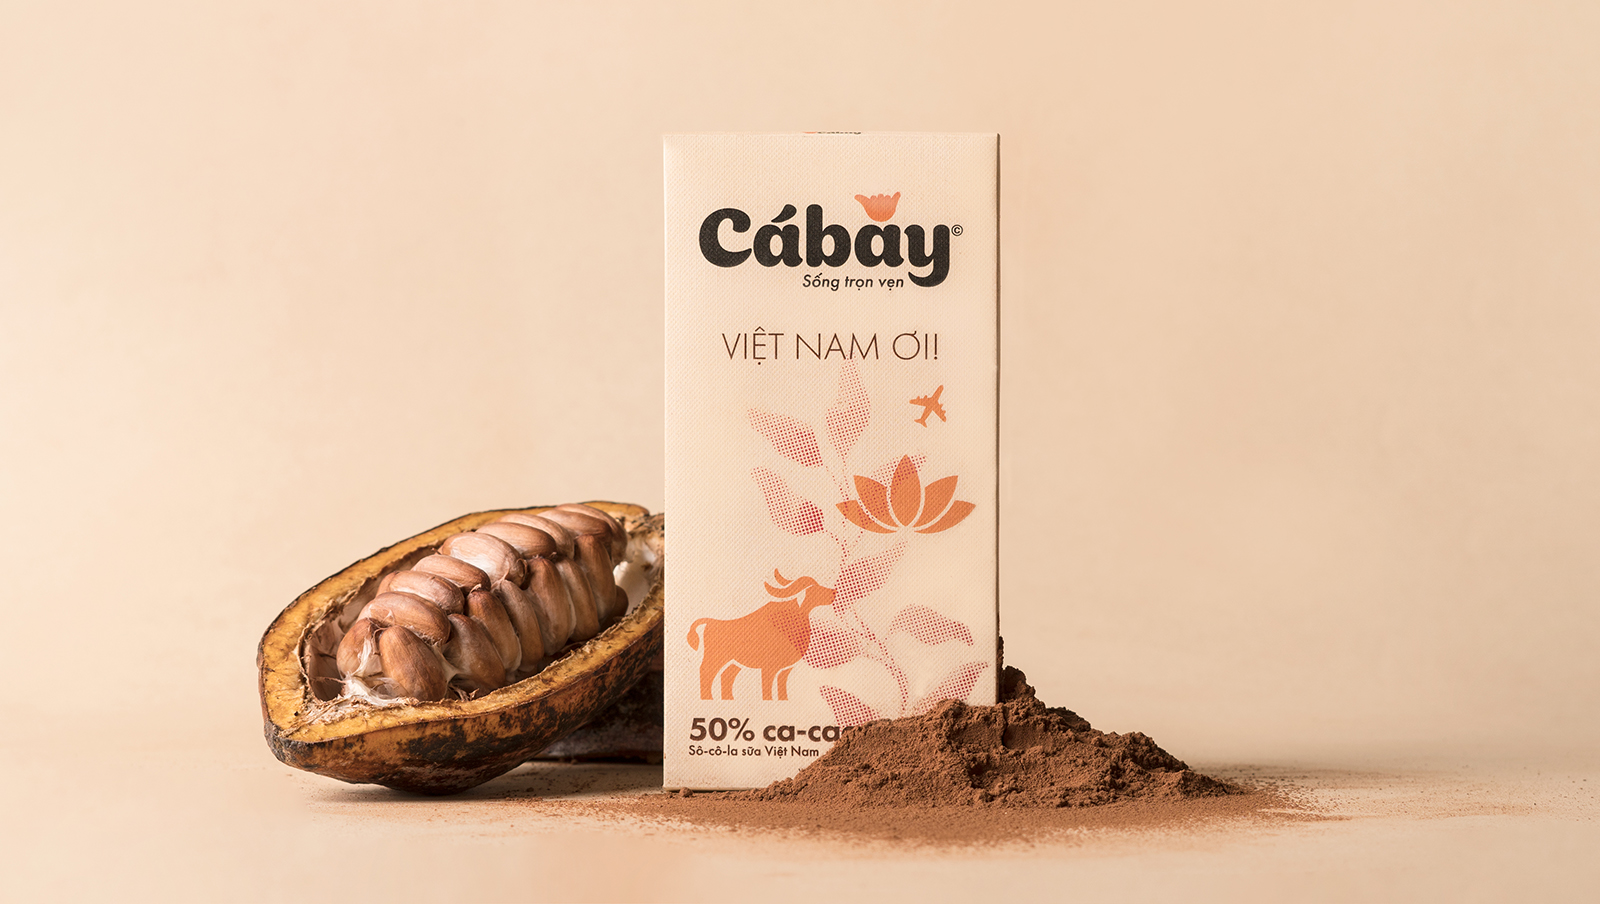 Cá Bay Chocolate Packaging Design by Brand Intheblack